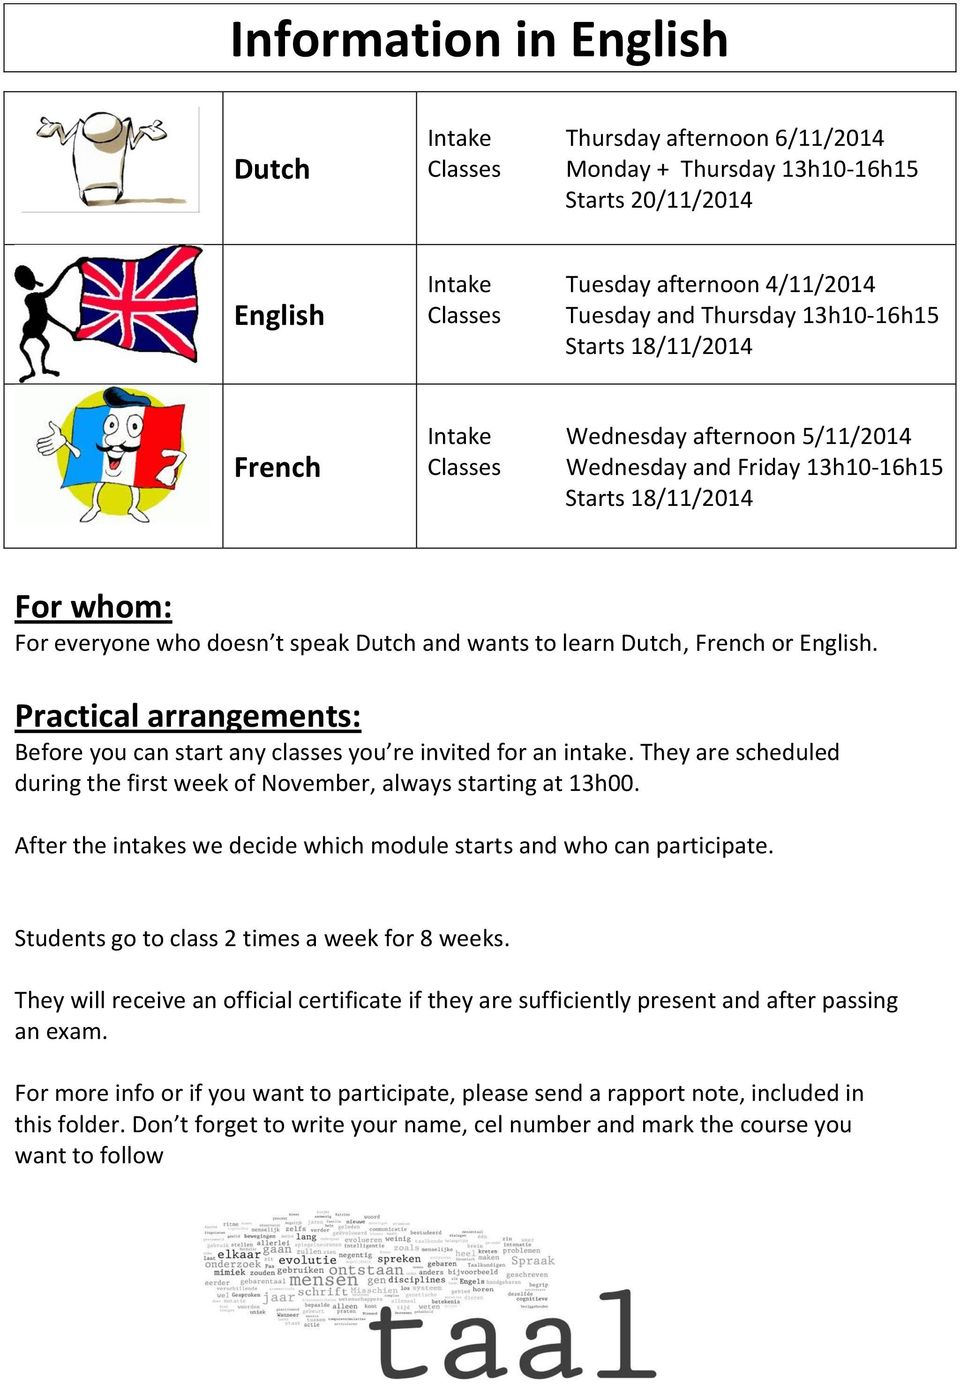 English. Practical arrangements: Befre yu can start any classes yu re invited fr an intake. They are scheduled during the first week f Nvember, always starting at 13h00.